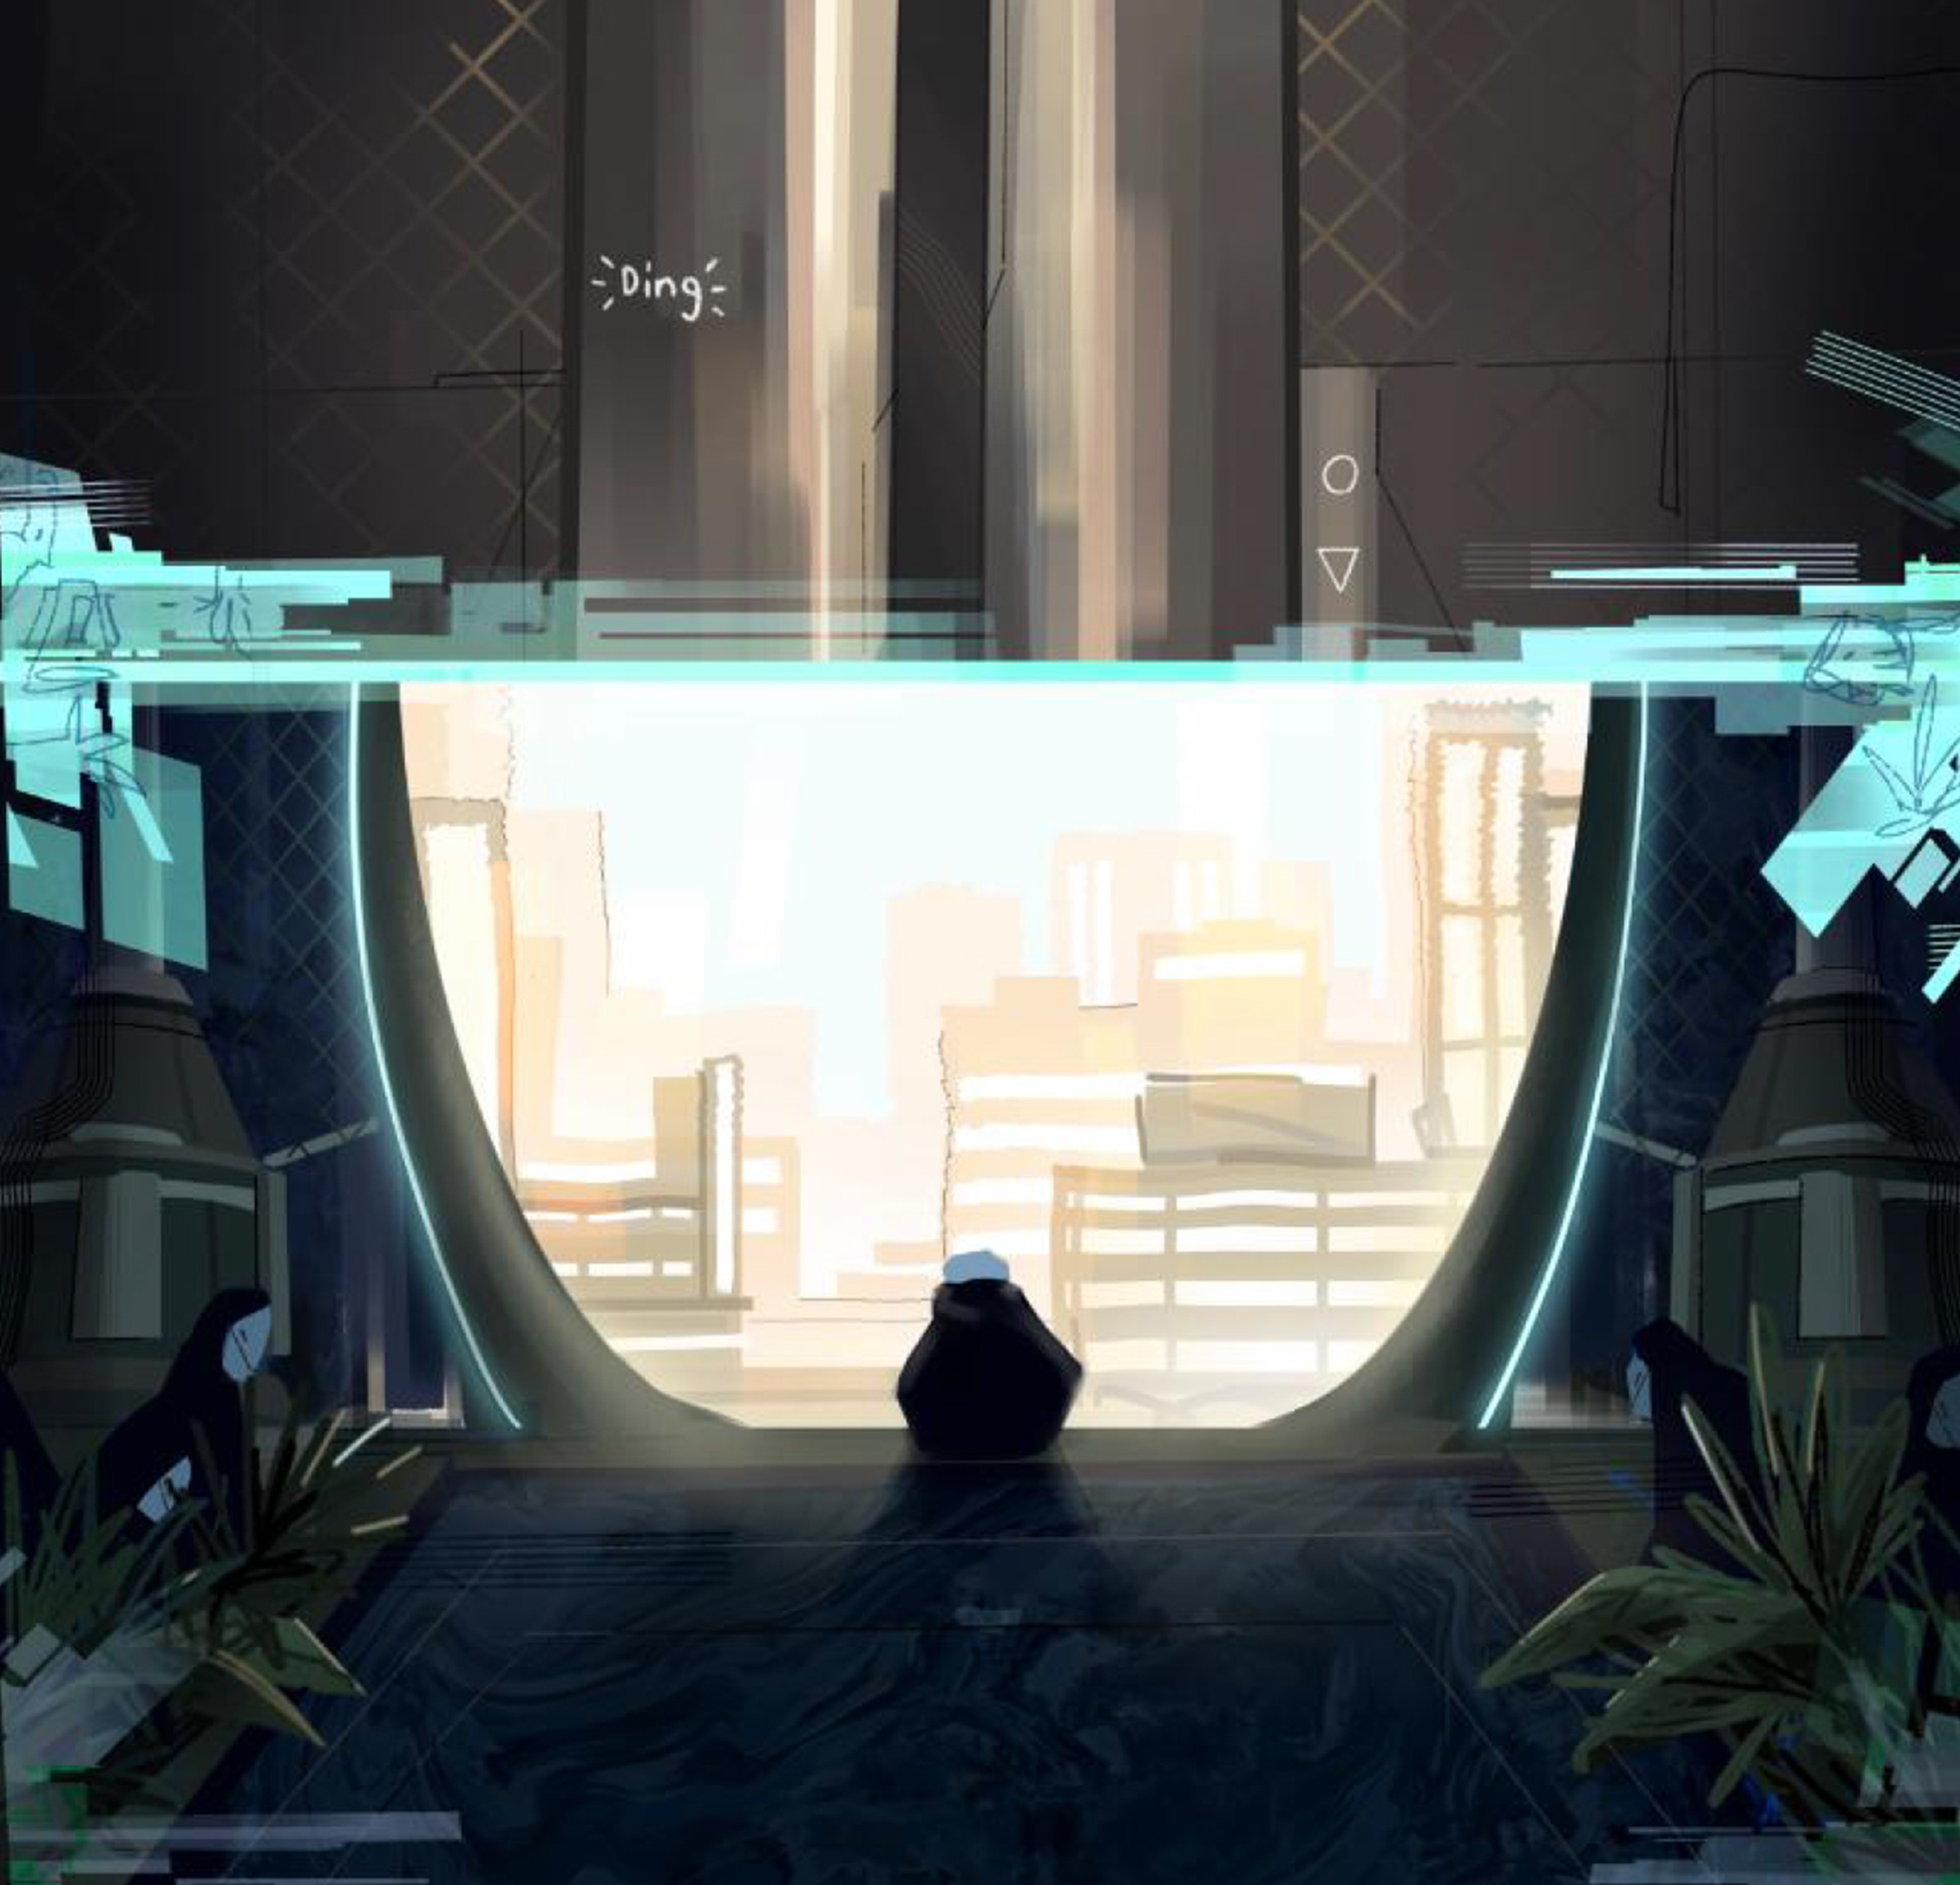 digital illustration depicting a man kneeling in front of a window in a futuristic apartment